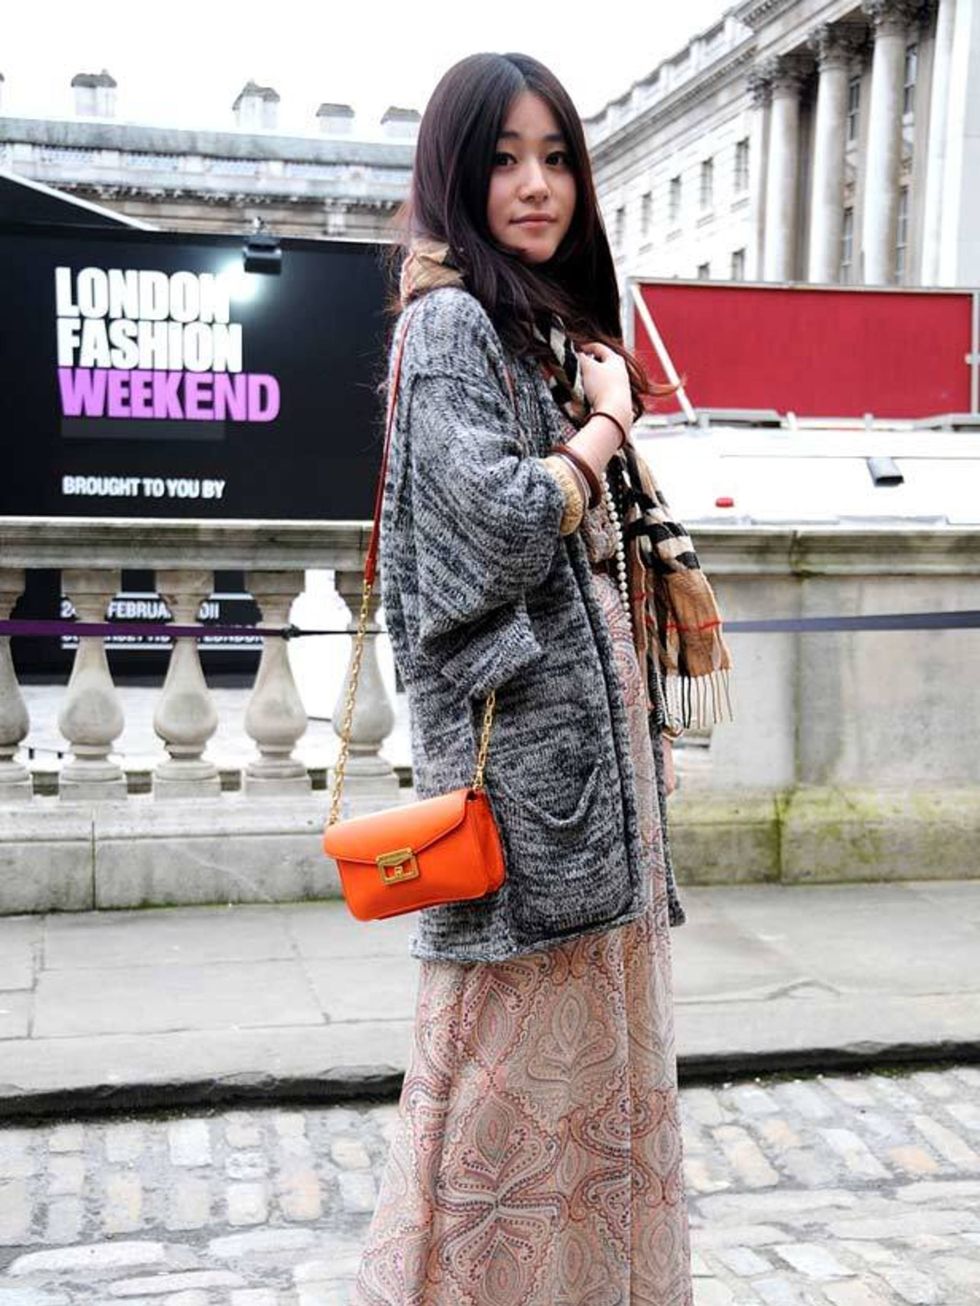 <p>Photo by Ekua King @ Anthea Simms.Shalu, 21, Student. Topshop jumper and dress, Marc Jacobs bag, Burberry scarf</p>